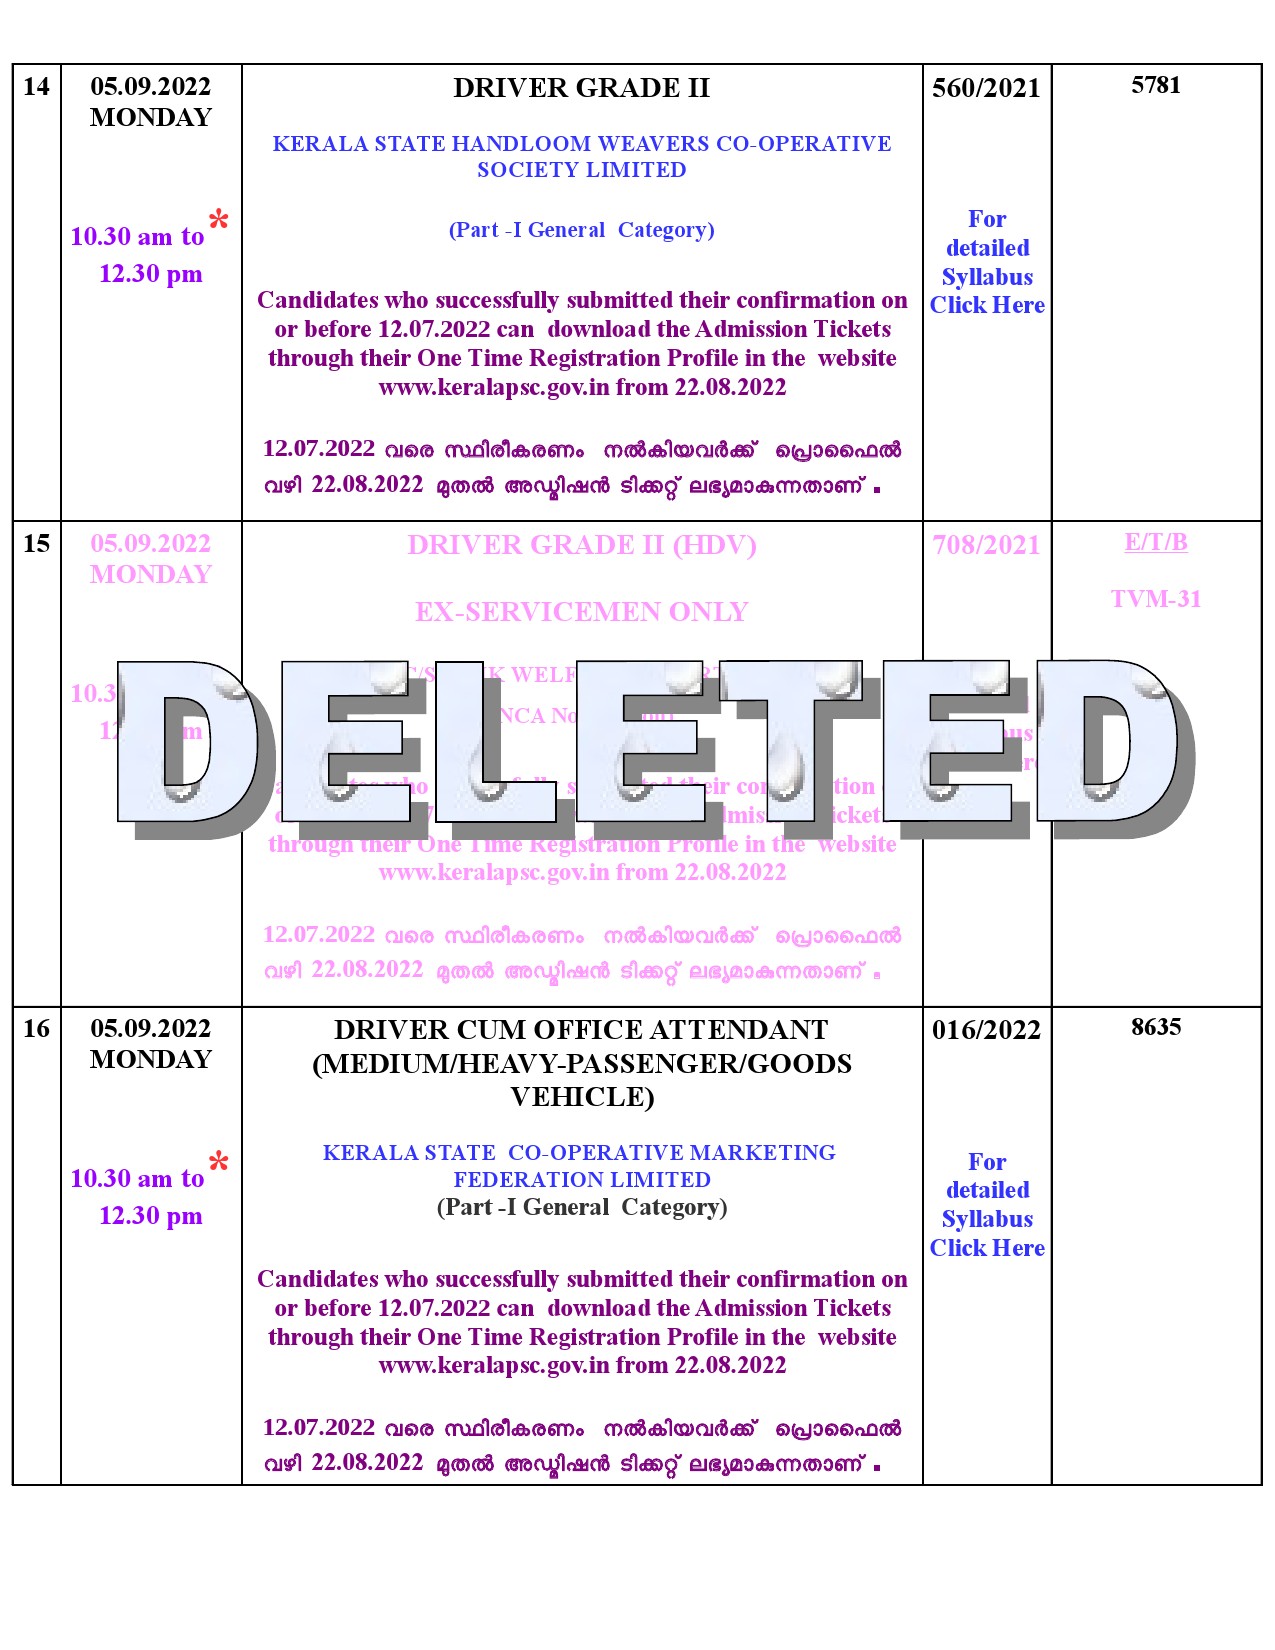 KPSC Modified Exam For The Month Of September 2022 - Notification Image 7